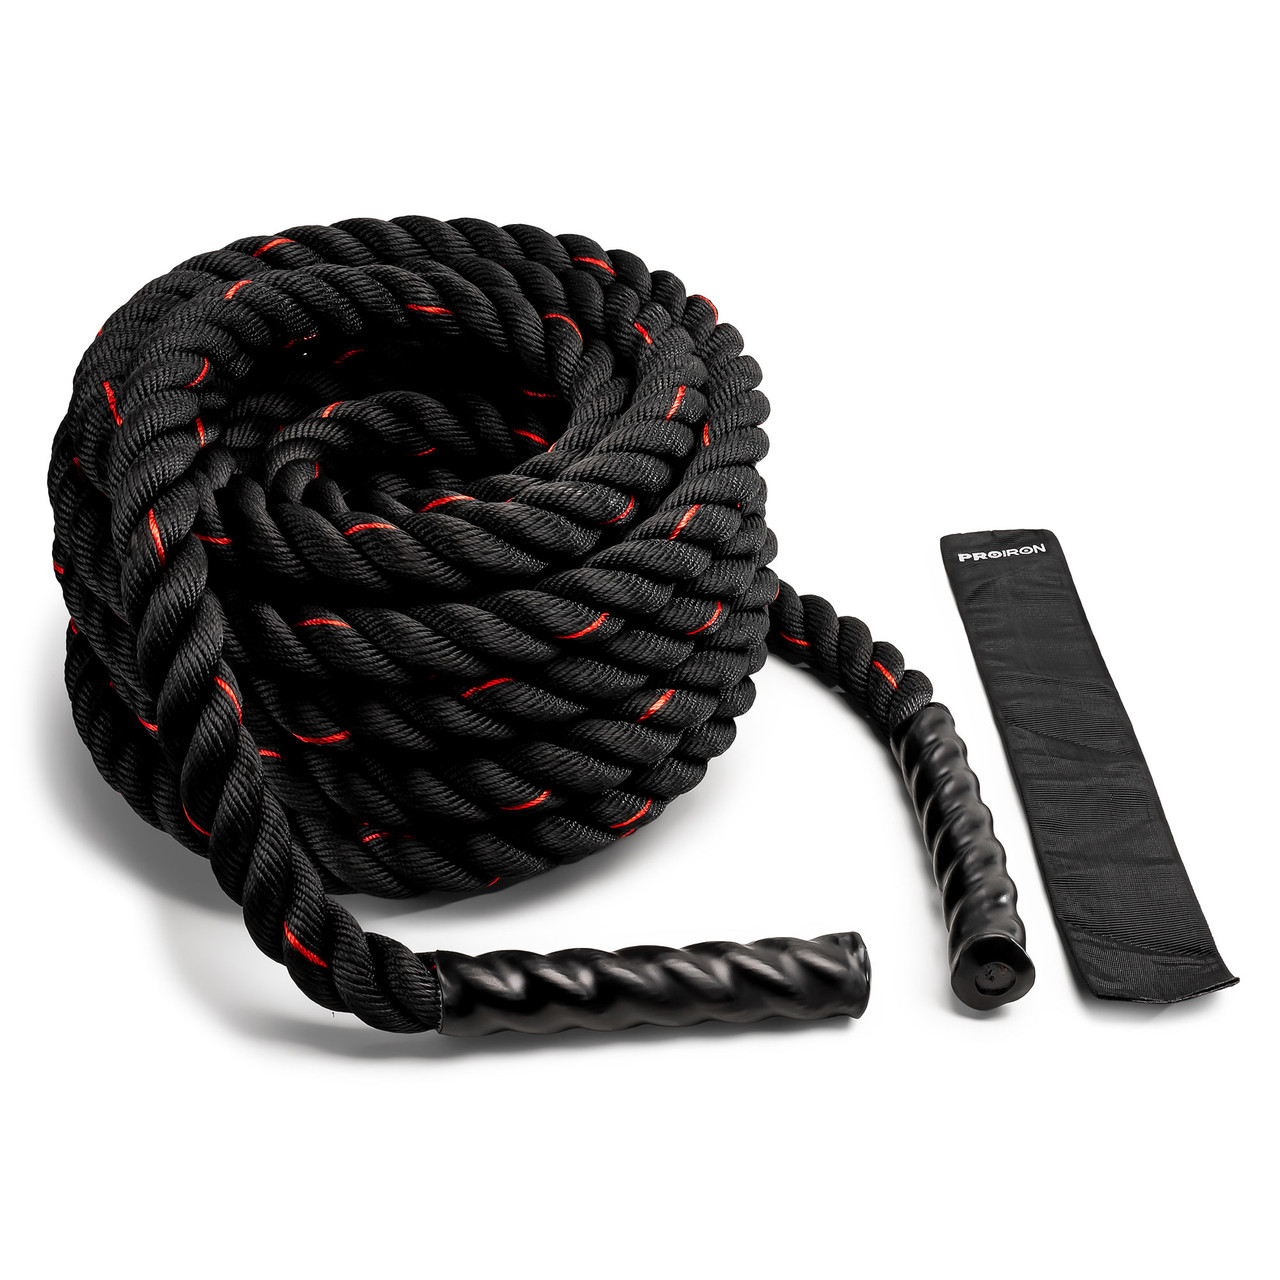 https://cdn11.bigcommerce.com/s-r2fl439k1s/images/stencil/1280x1280/products/542/3801/12_M_40_ft_Battle_Ropes_38mm_1.5_Inch_Diamater_Heavy_Exercise_Rope_ProIron_PRO-ZS01-2__98166.1688685753.jpg?c=2